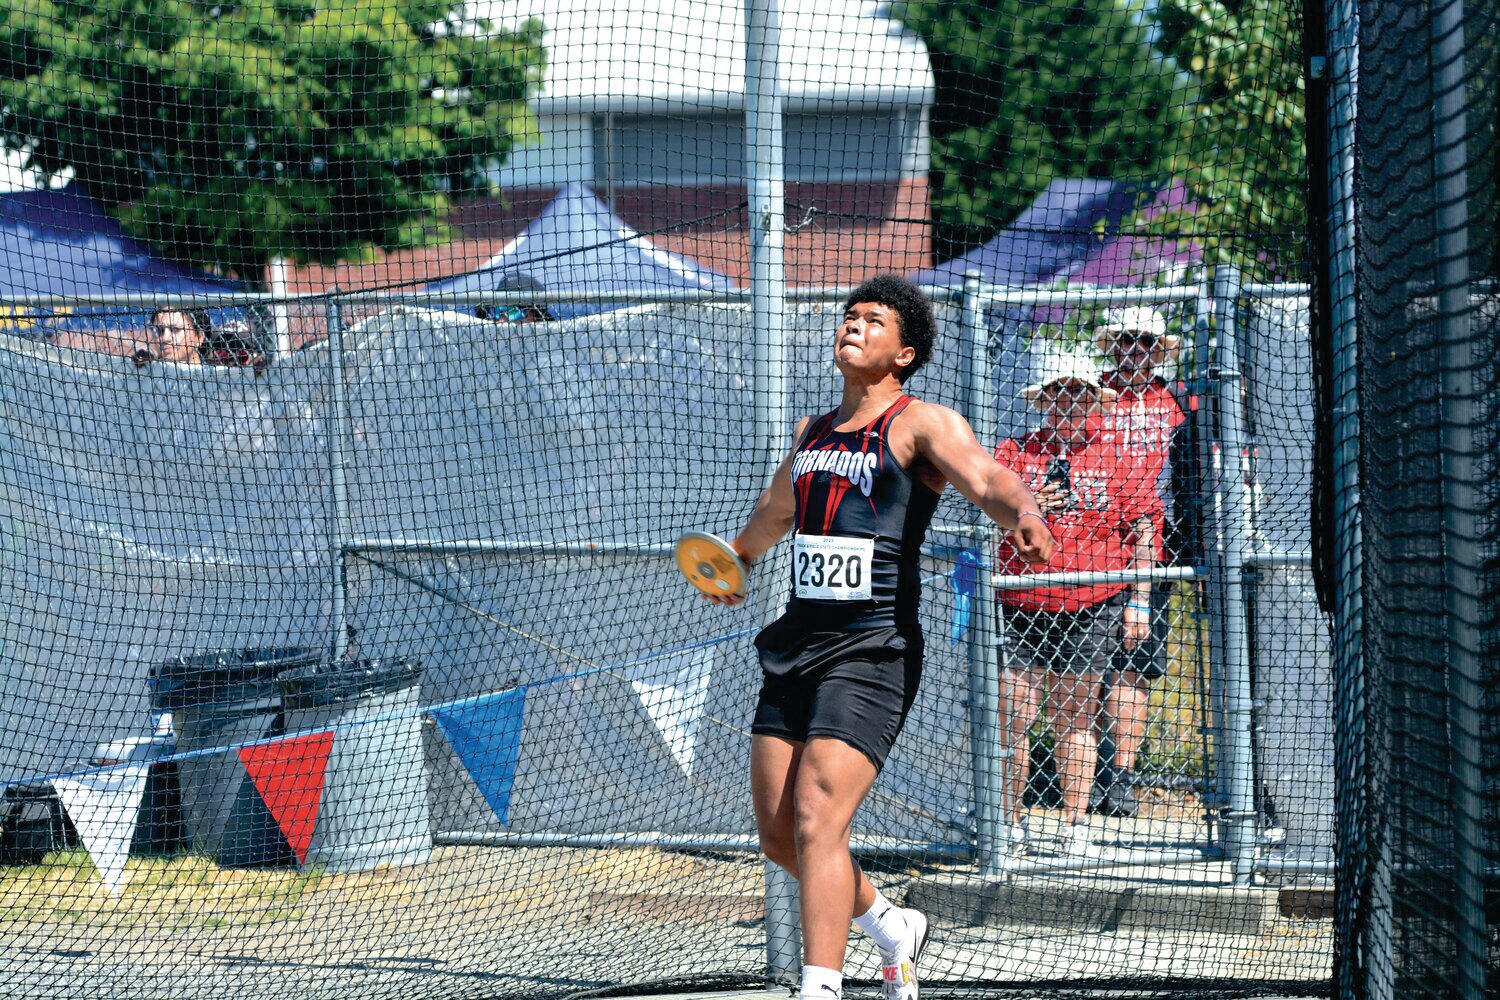 3A state champion Isaiah Patterson launches a championship throw of 177 feet and 4 inches on Friday, May 26.